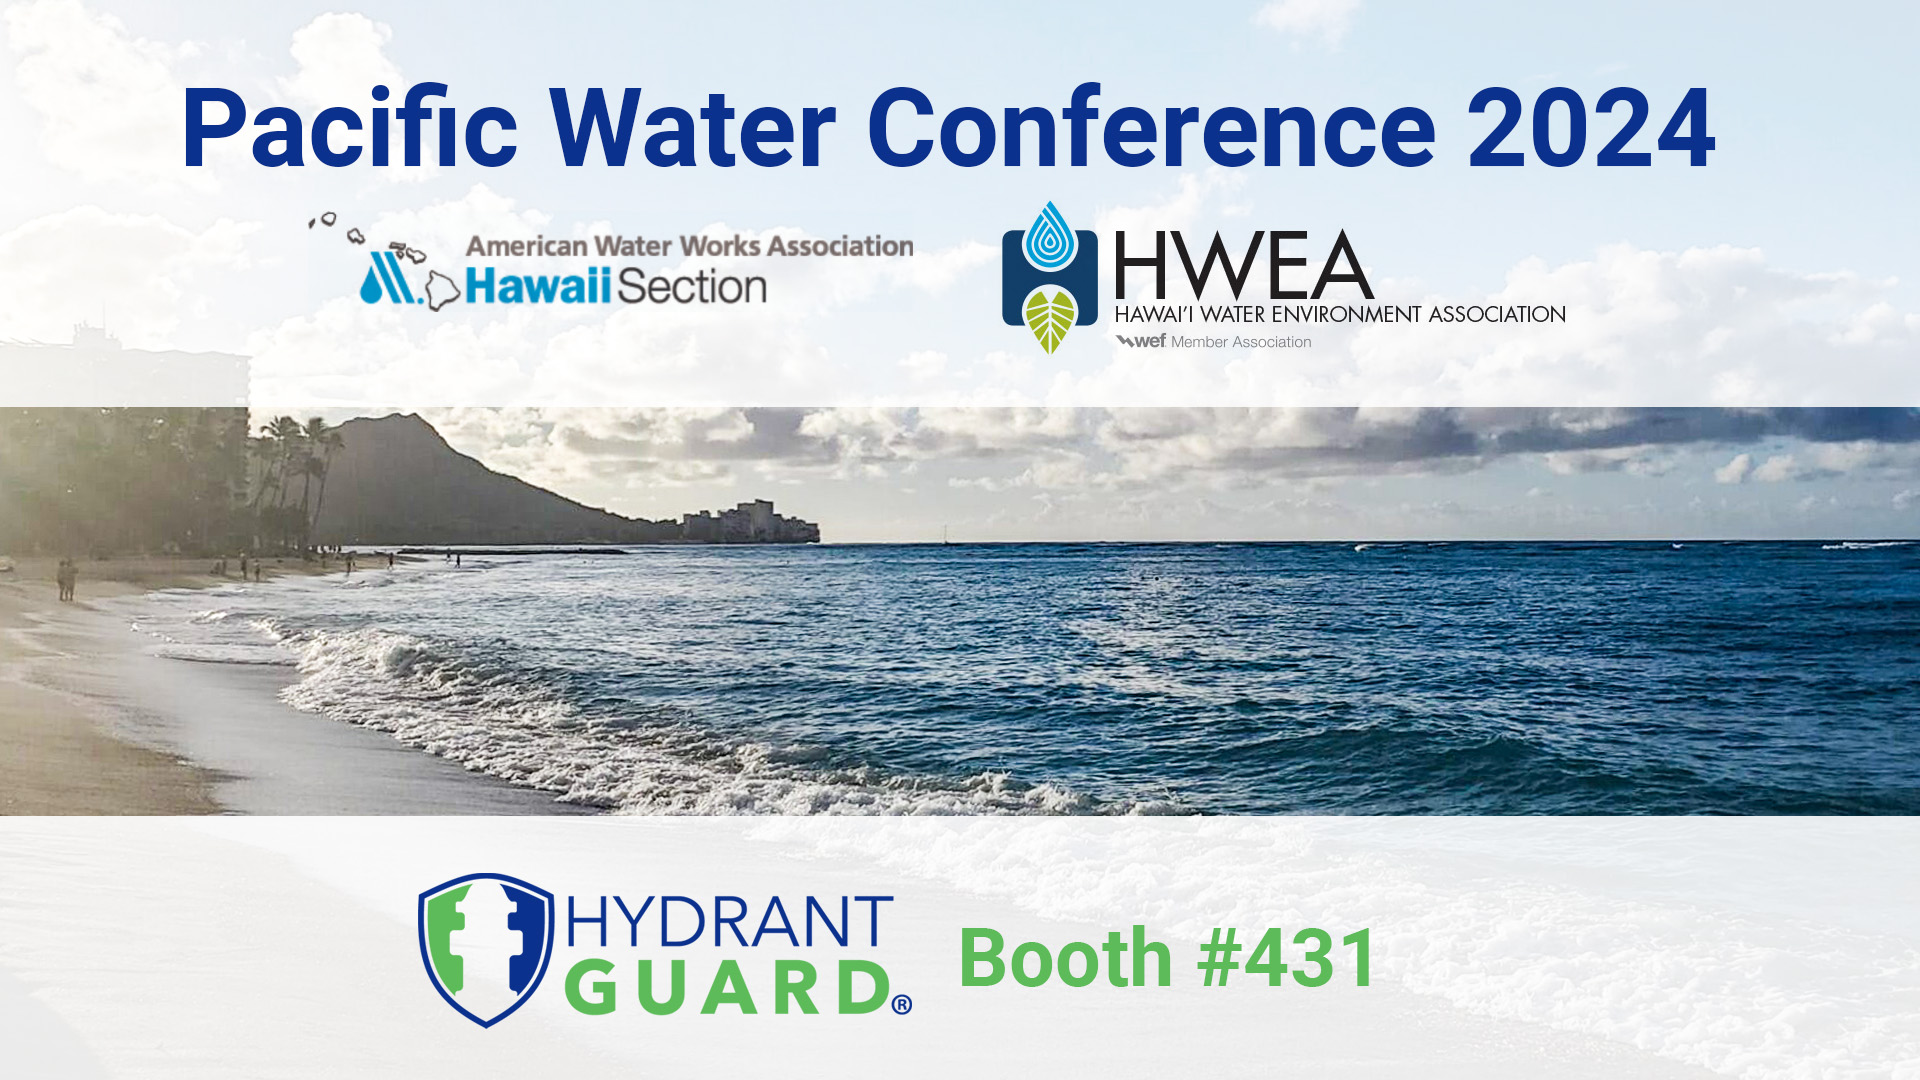 Pacific Water Conference 2024 - Hydrant Guard banner